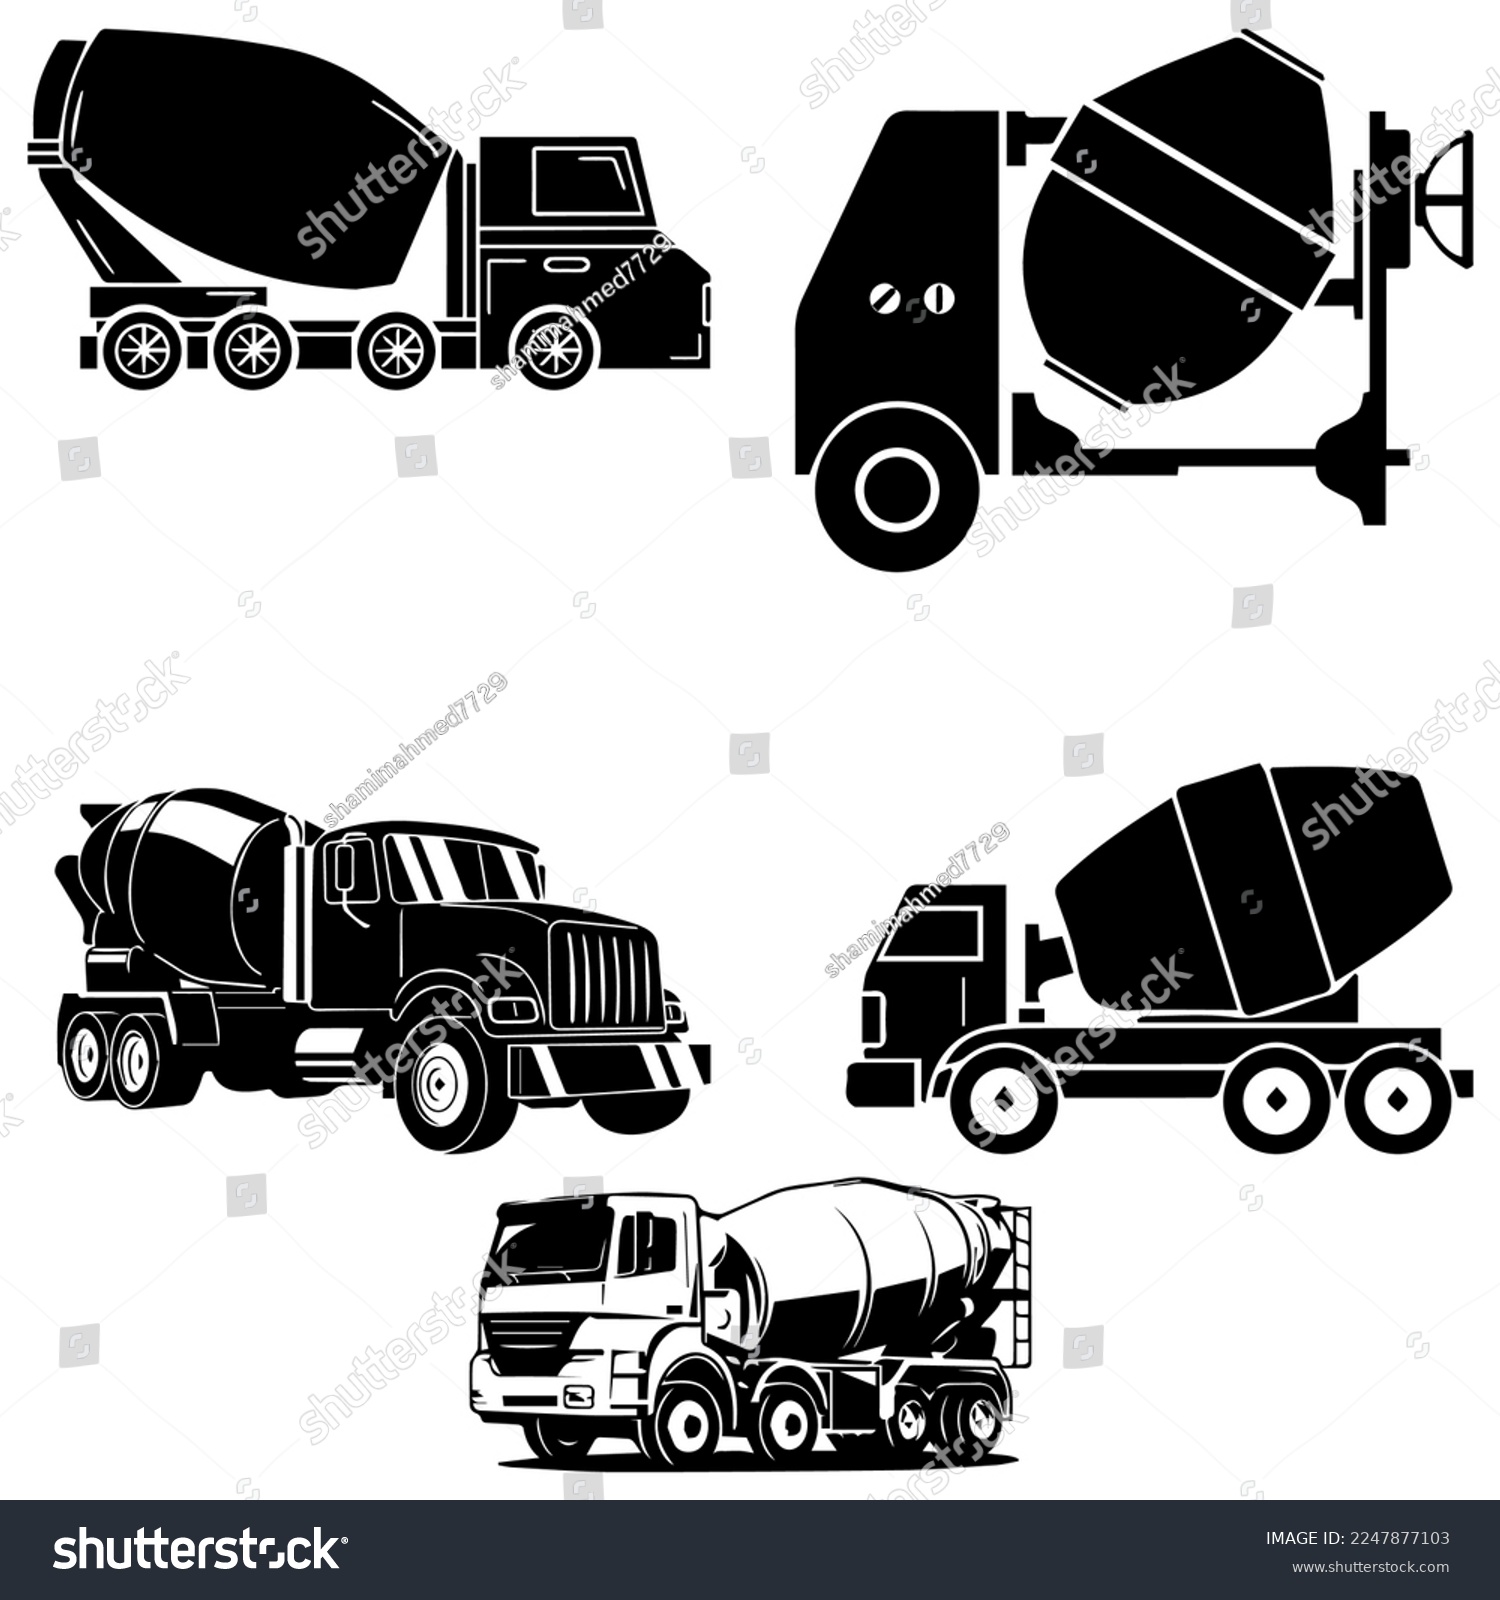 SVG of Concrete mixer icon, cement mixer vector, pouring cement.Concrete truck icon. Mixer cement truck side in flat style design. industry equipment machine. Construction machinery for pouring of cement. svg